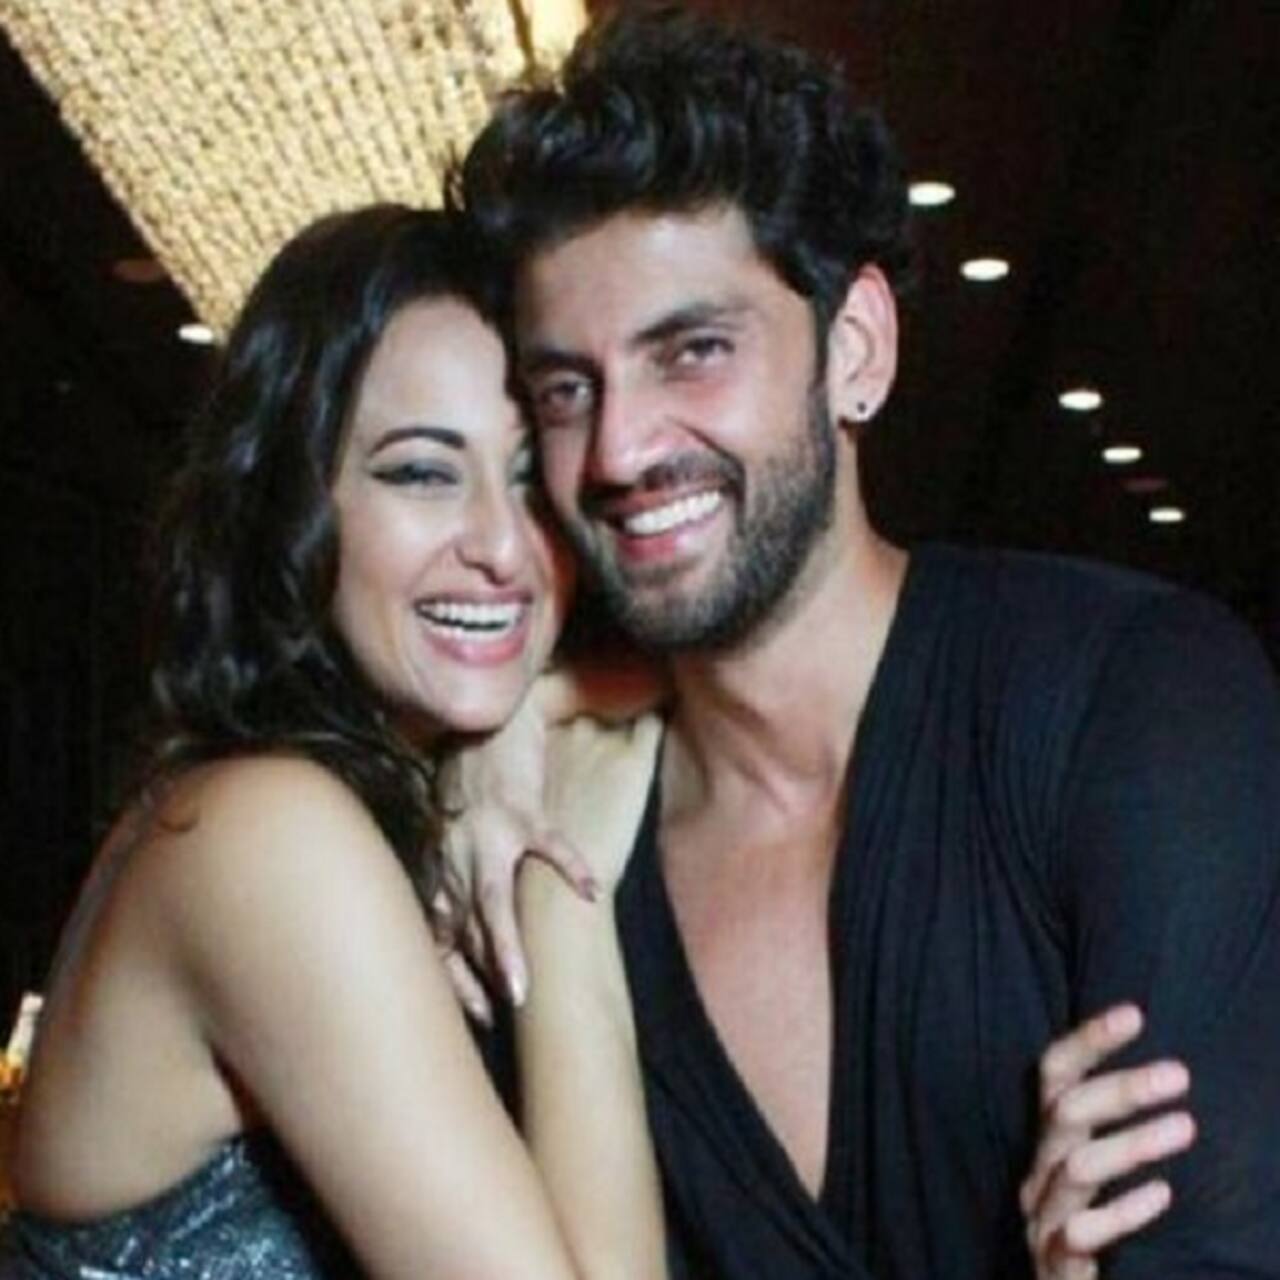 Sonakshi Sinha, Zaheer Iqbal to get married this year after making their relationship public? [Exclusive]